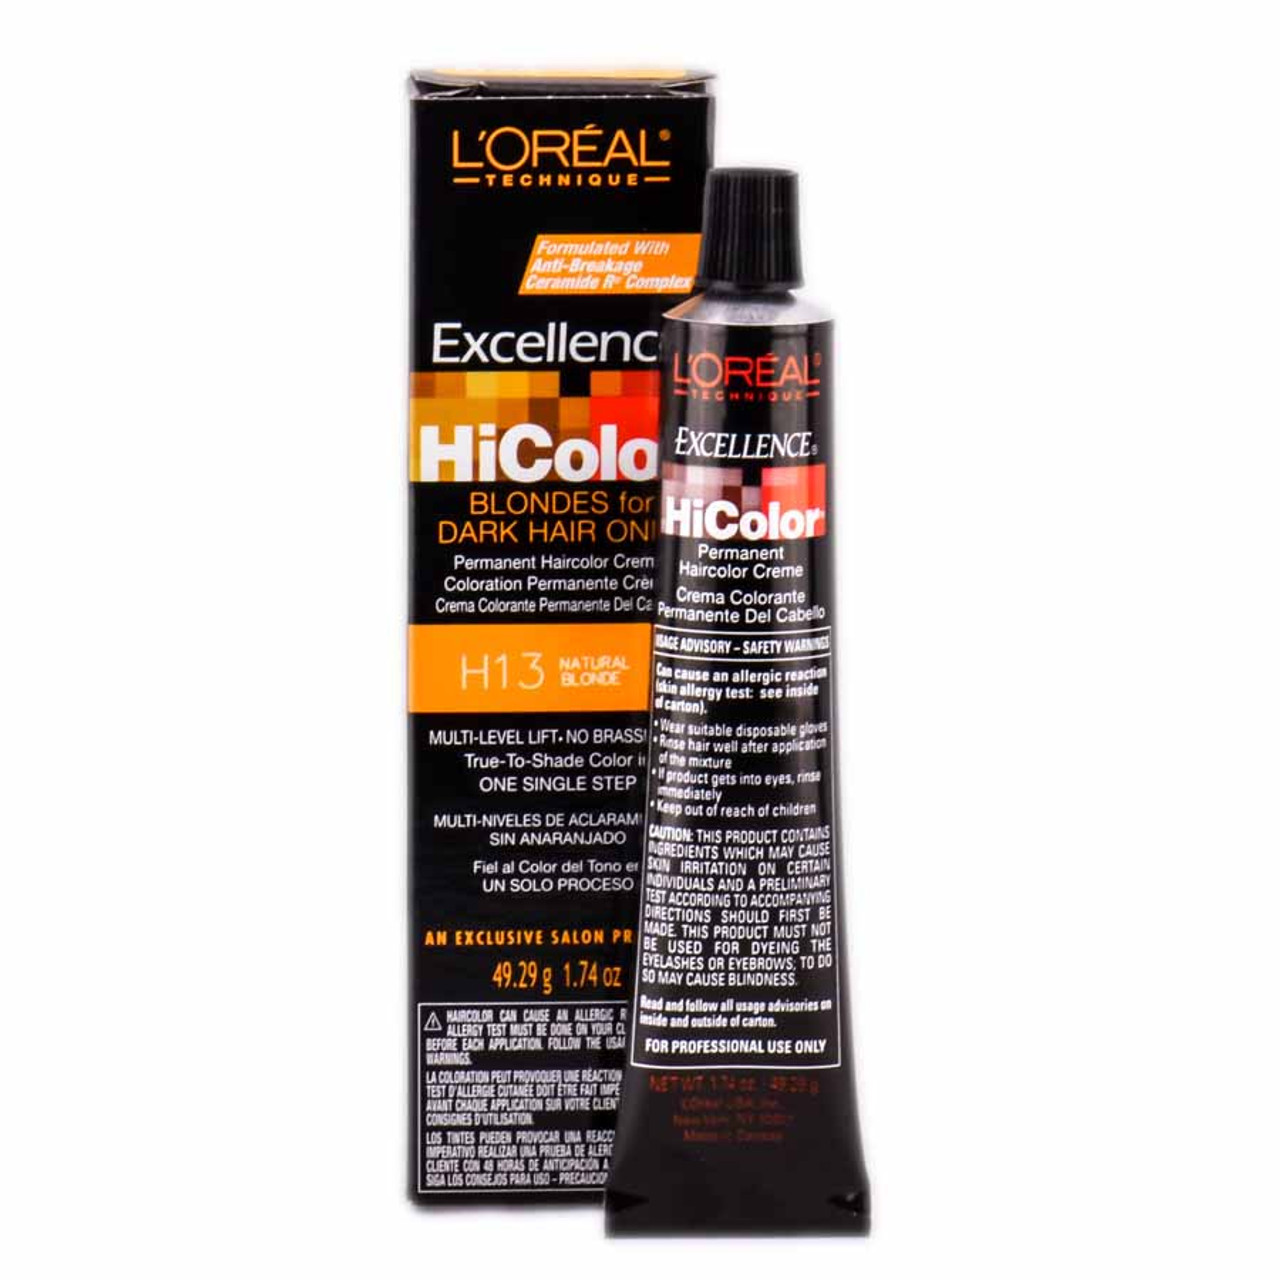 What it is: The L’Oreal Technique Excellence HiColor Blondes coll...